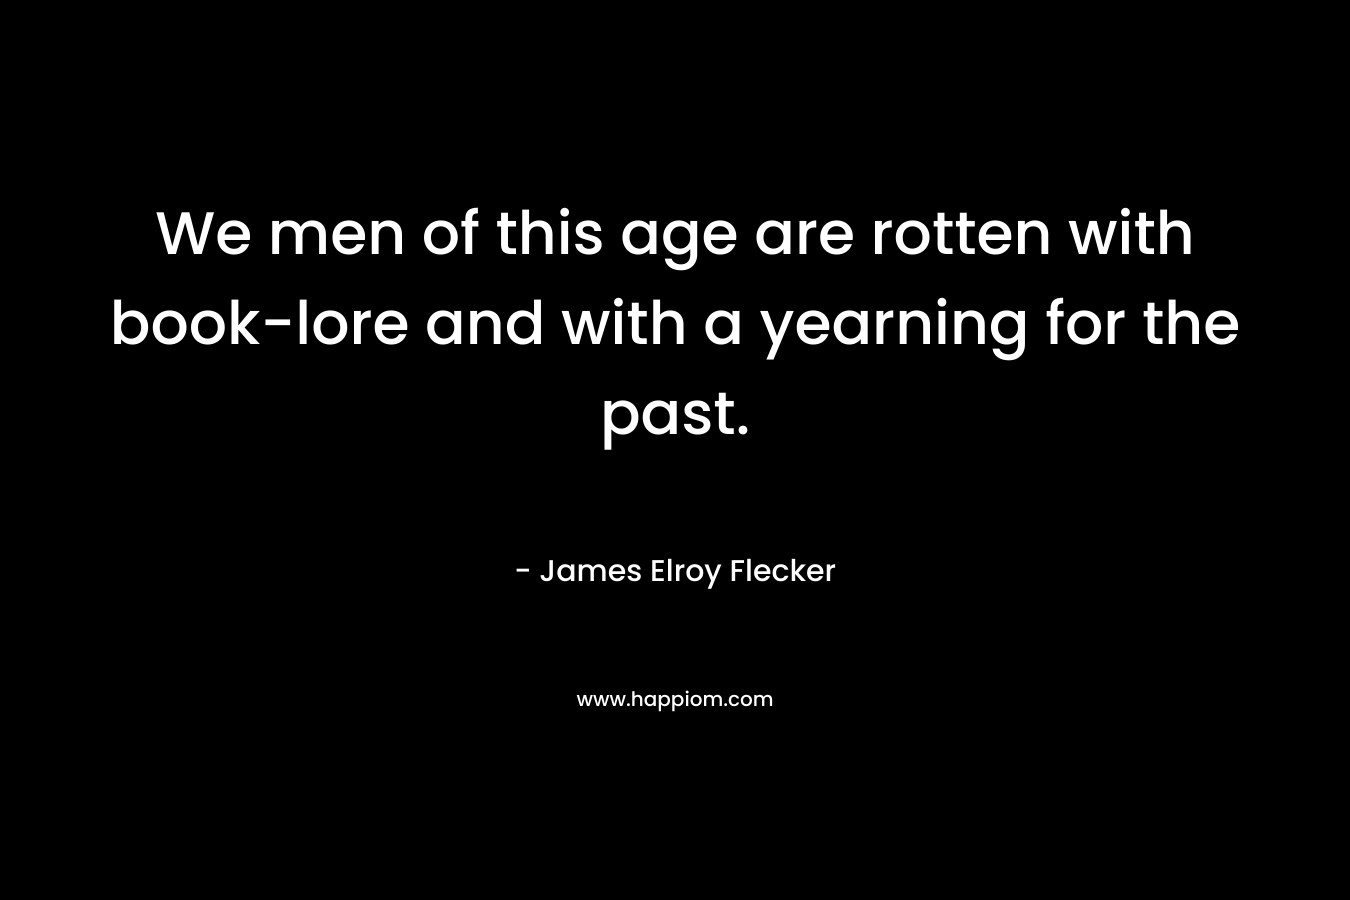 We men of this age are rotten with book-lore and with a yearning for the past.